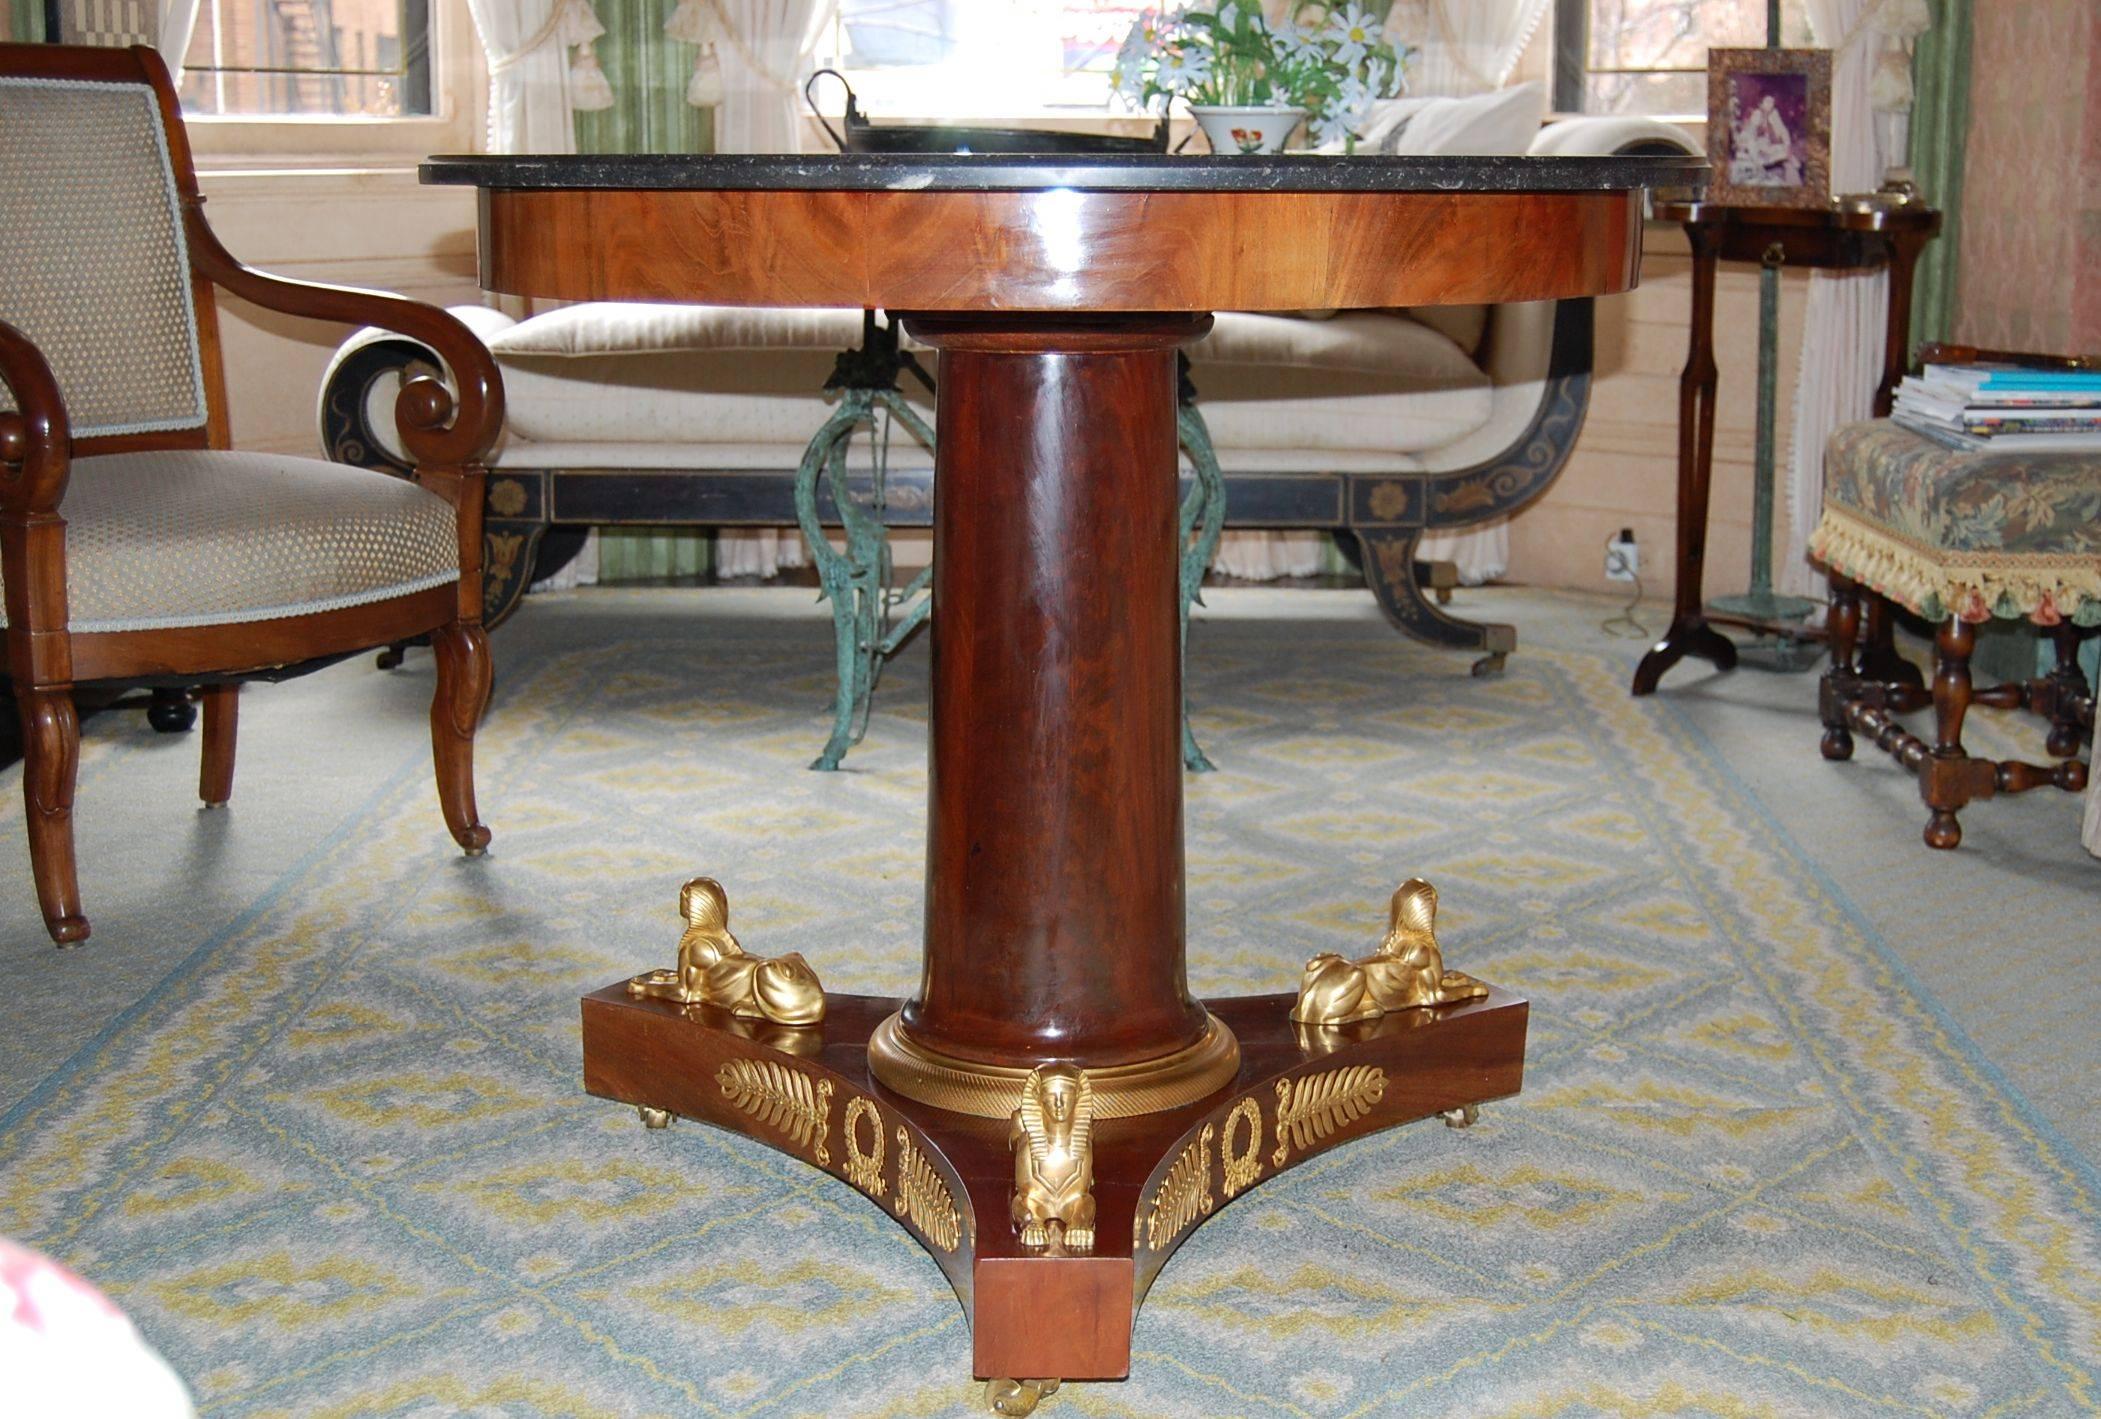 A mahogany French Empire gueridon with original fossil marble top, above a cylindrical column, to a plate form base with a circular ormolu ring and original ormolu mounts. Base has three Sphinx and ormolu as well.